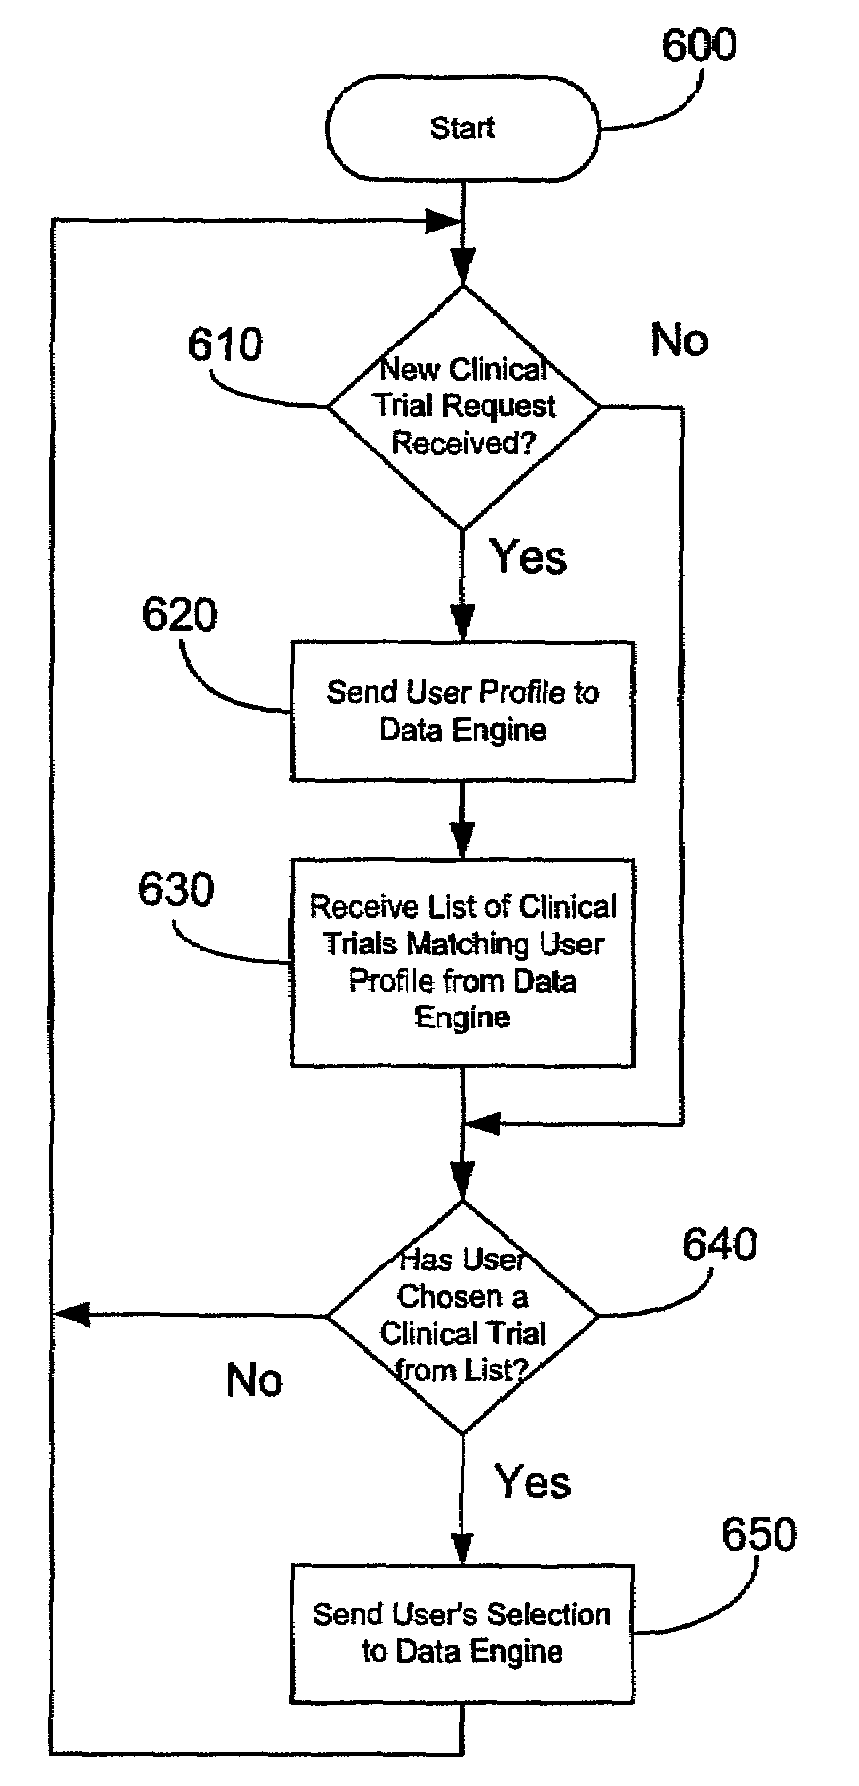 System and method for managing, manipulating, and analyzing data and devices over a distributed network